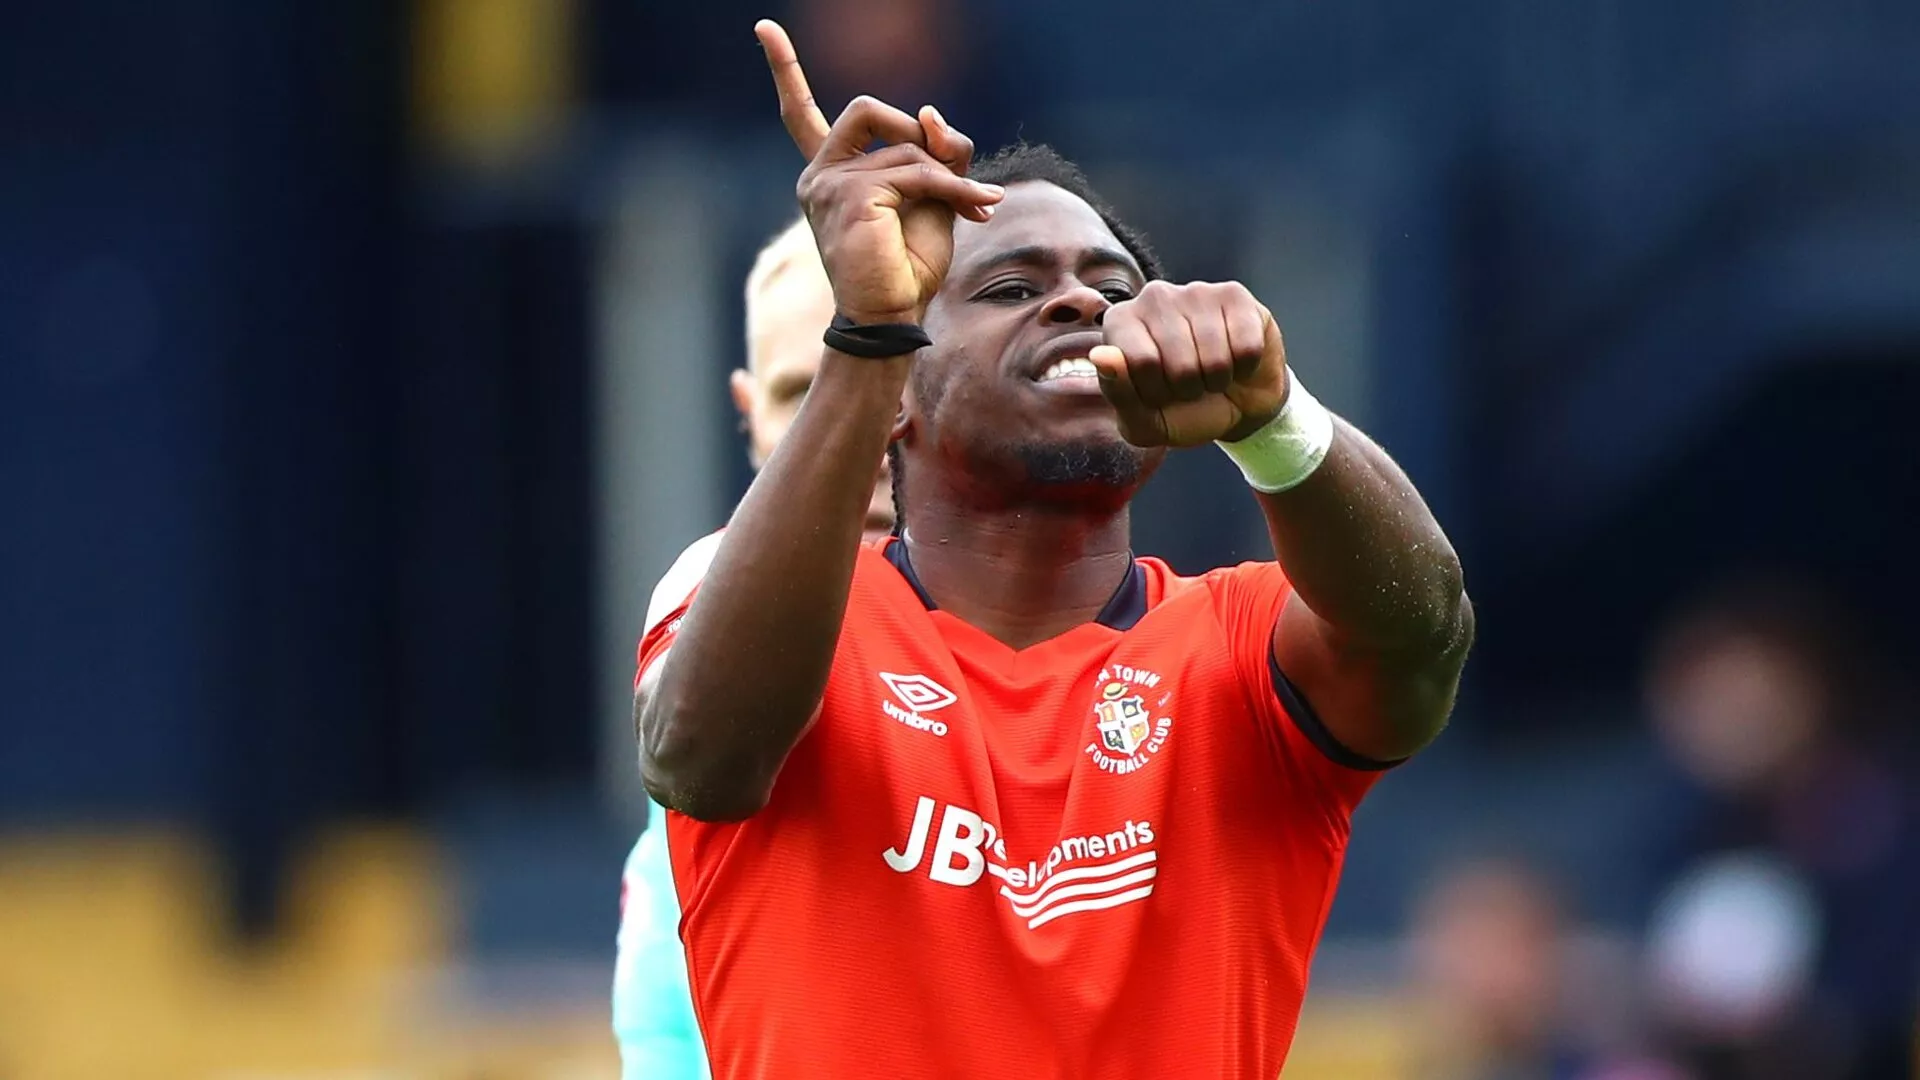 Pelly-Ruddock Mpanzu's incredible journey from Non-league to Premier League